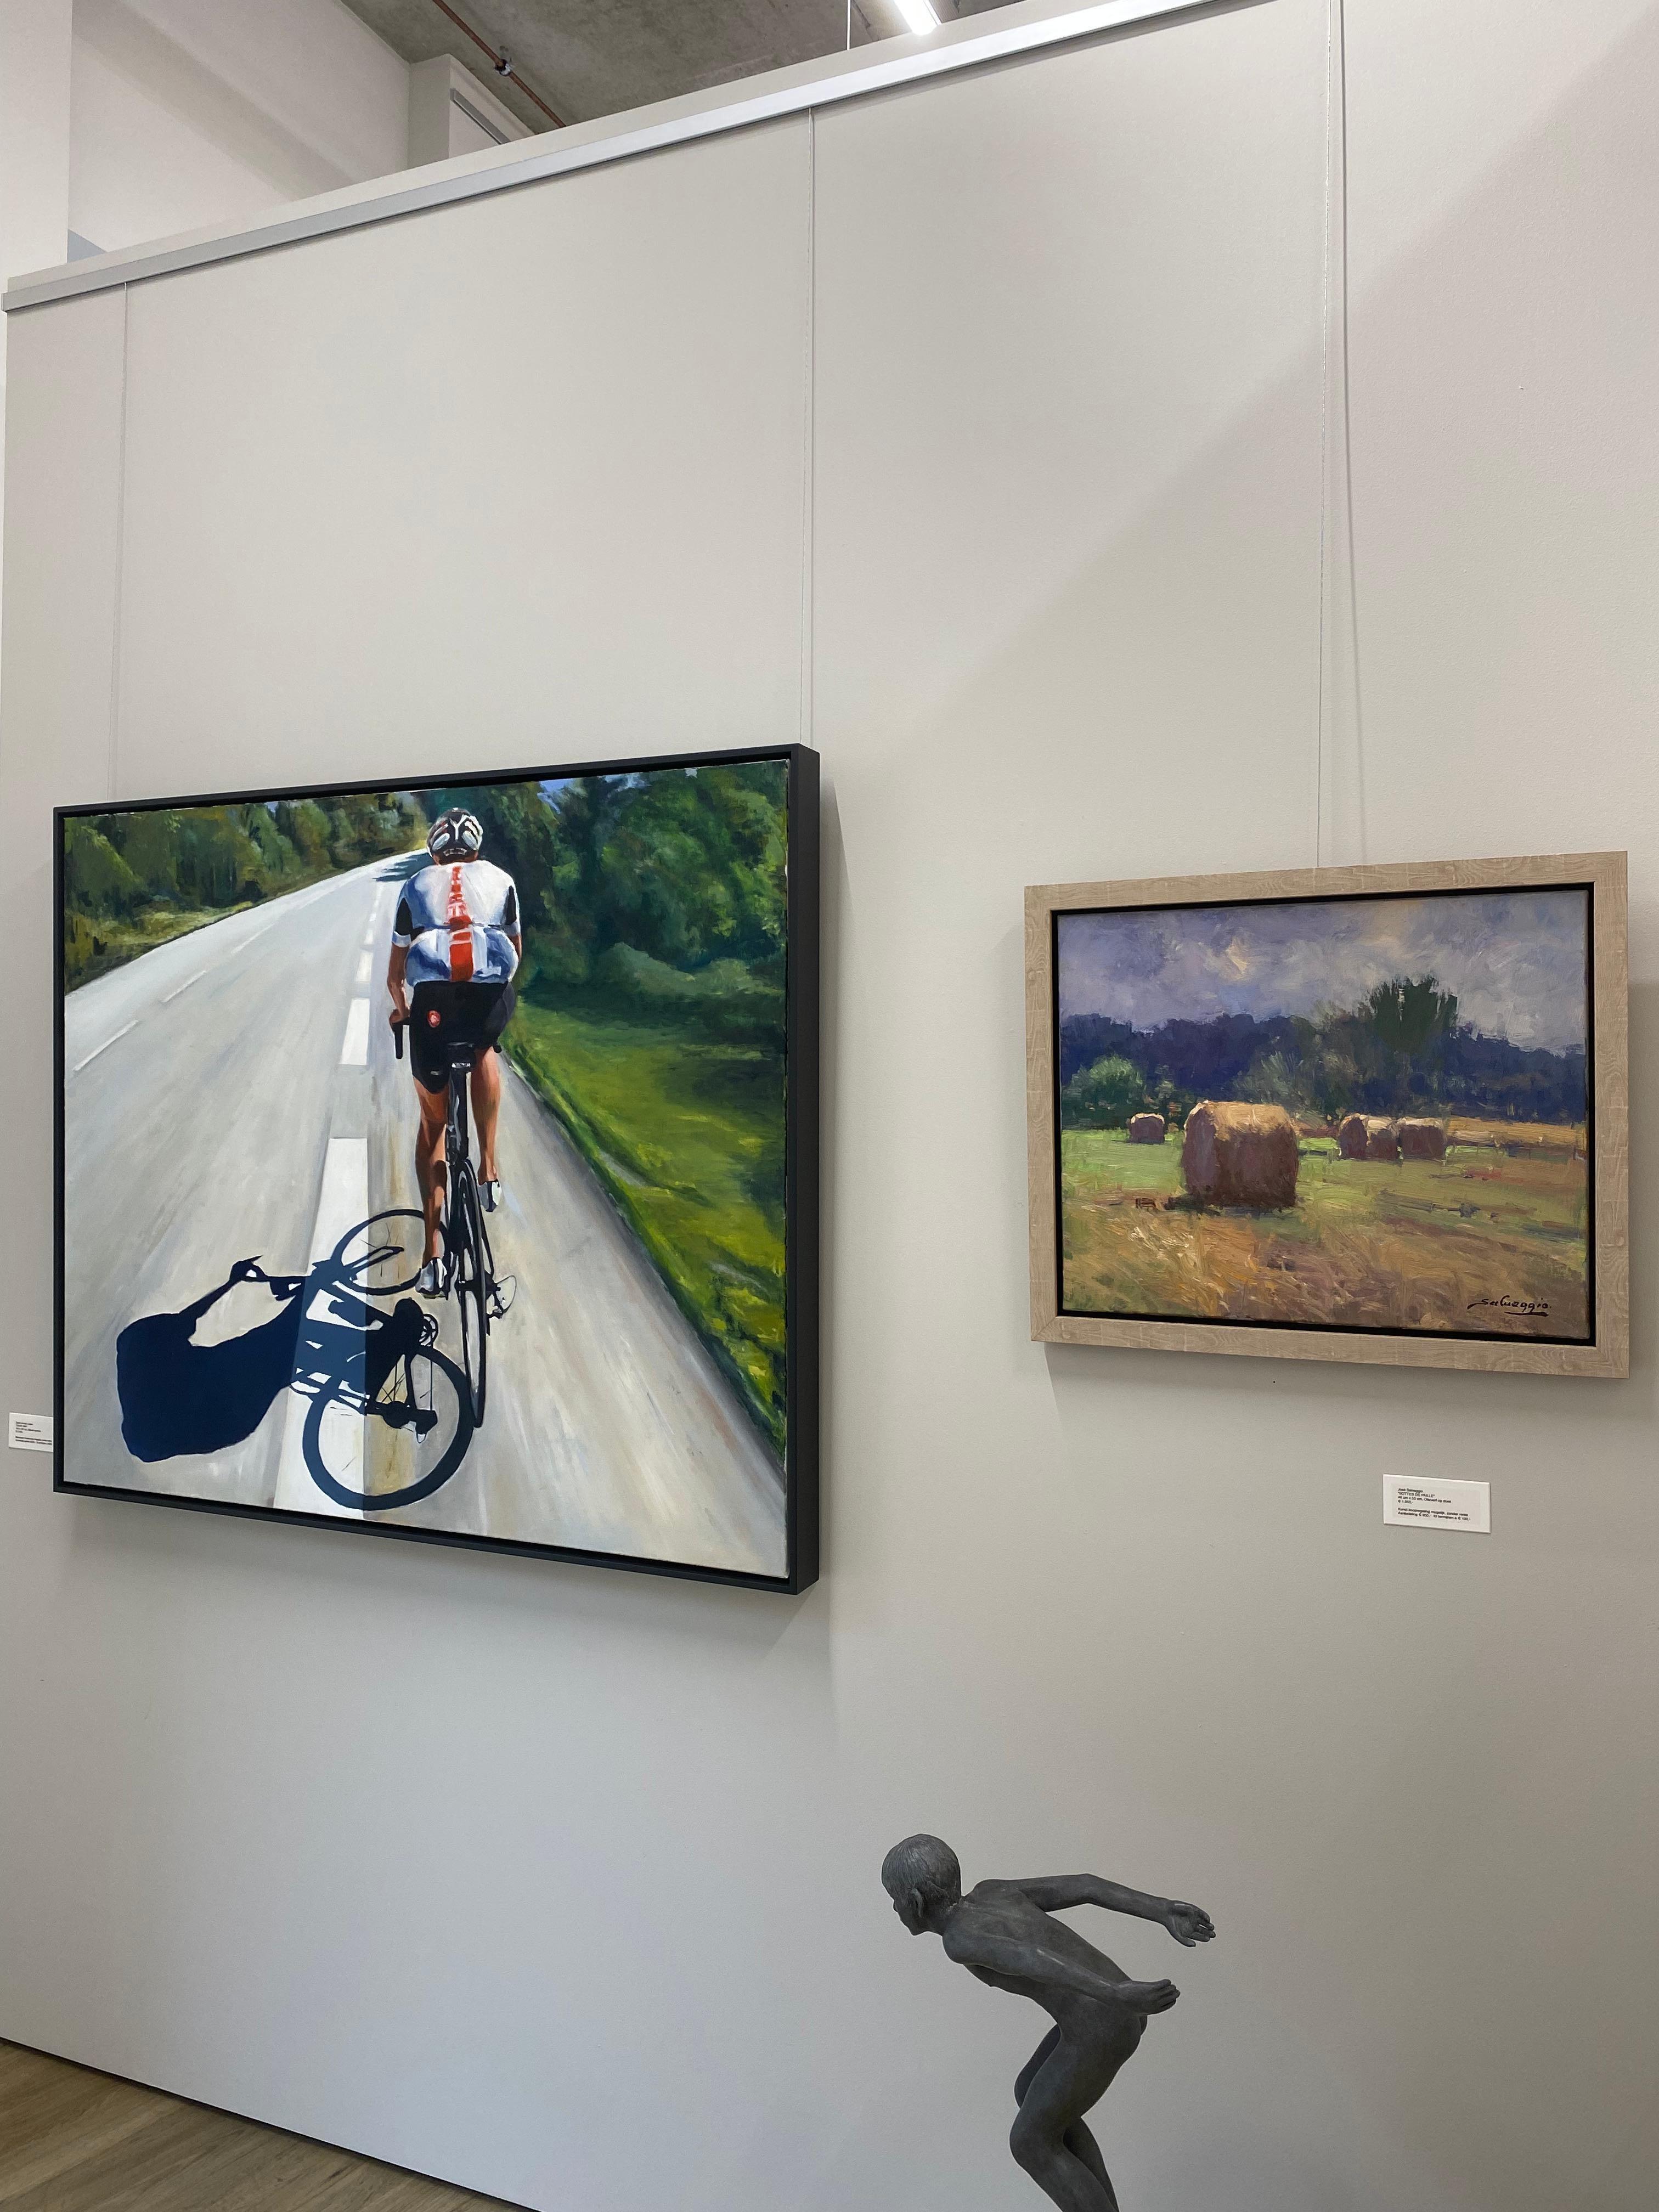 Cyclist - 21st Century Oil Painting of a Man cycling on a racing bike - Beige Figurative Painting by David van der Linden